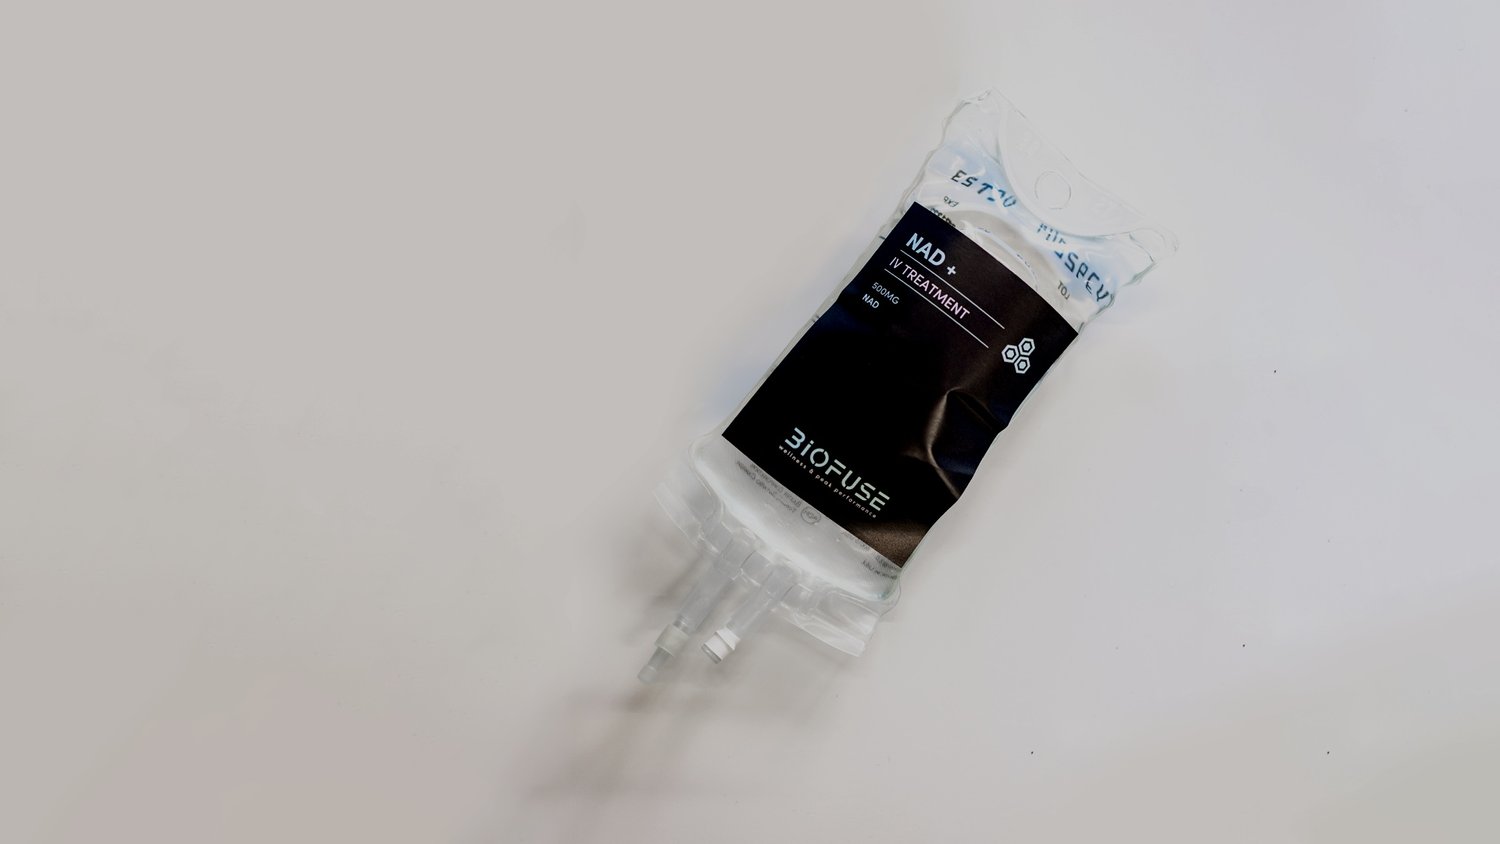 IV bag labeled 'NAD+' with drip tubing on a light background.